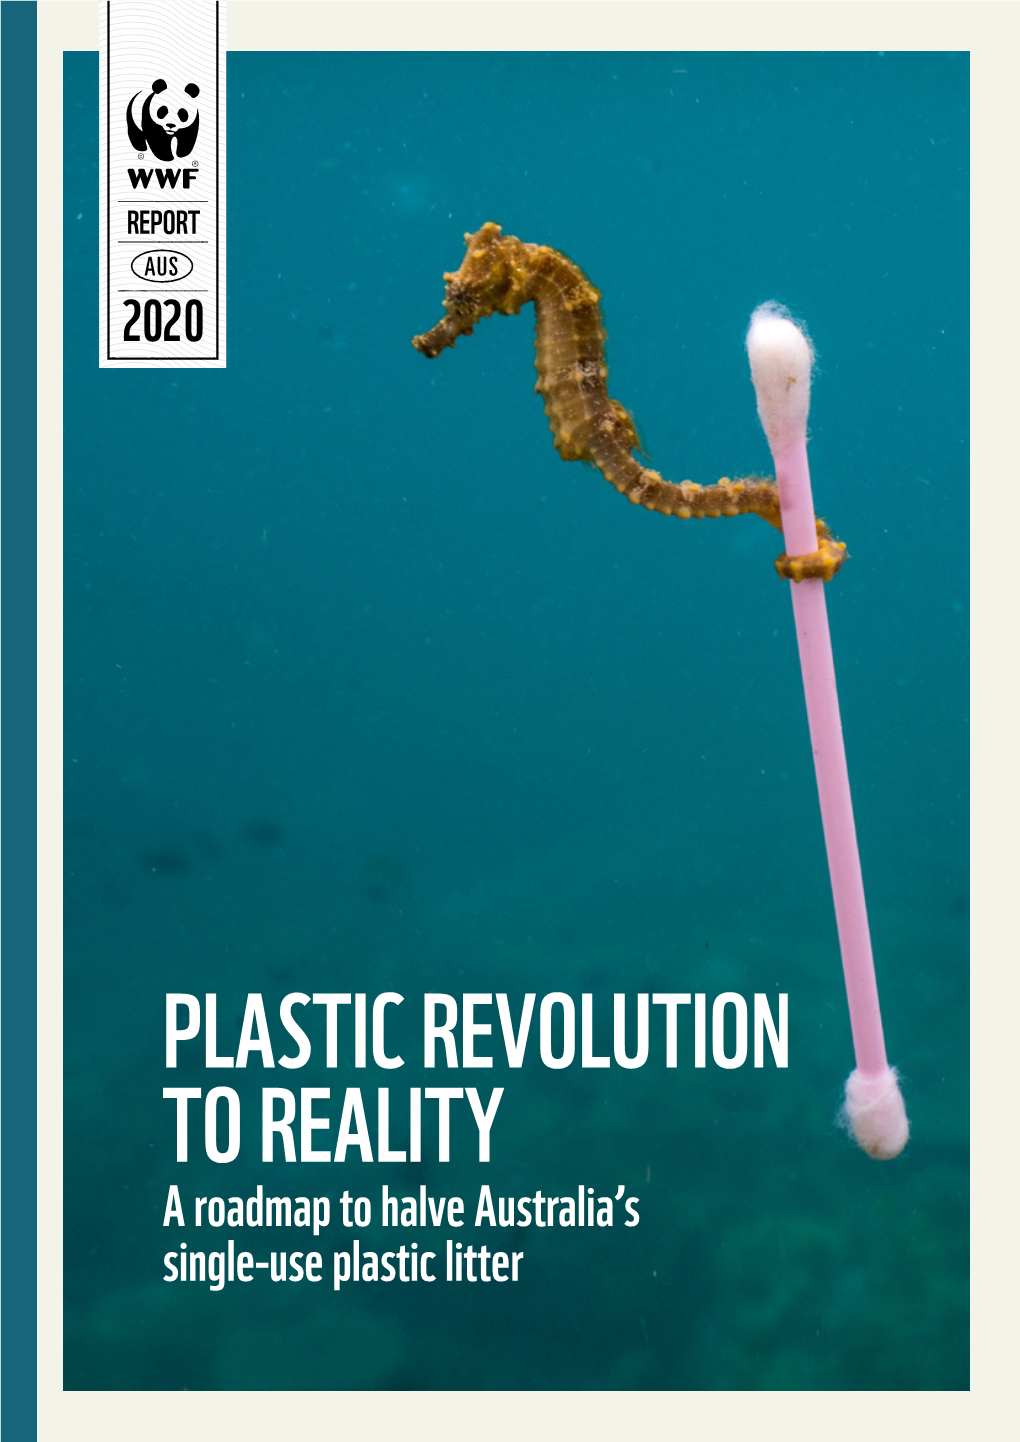 PLASTIC REVOLUTION to REALITY a Roadmap to Halve Australia’S Single-Use Plastic Litter Credits and Acknowledgements